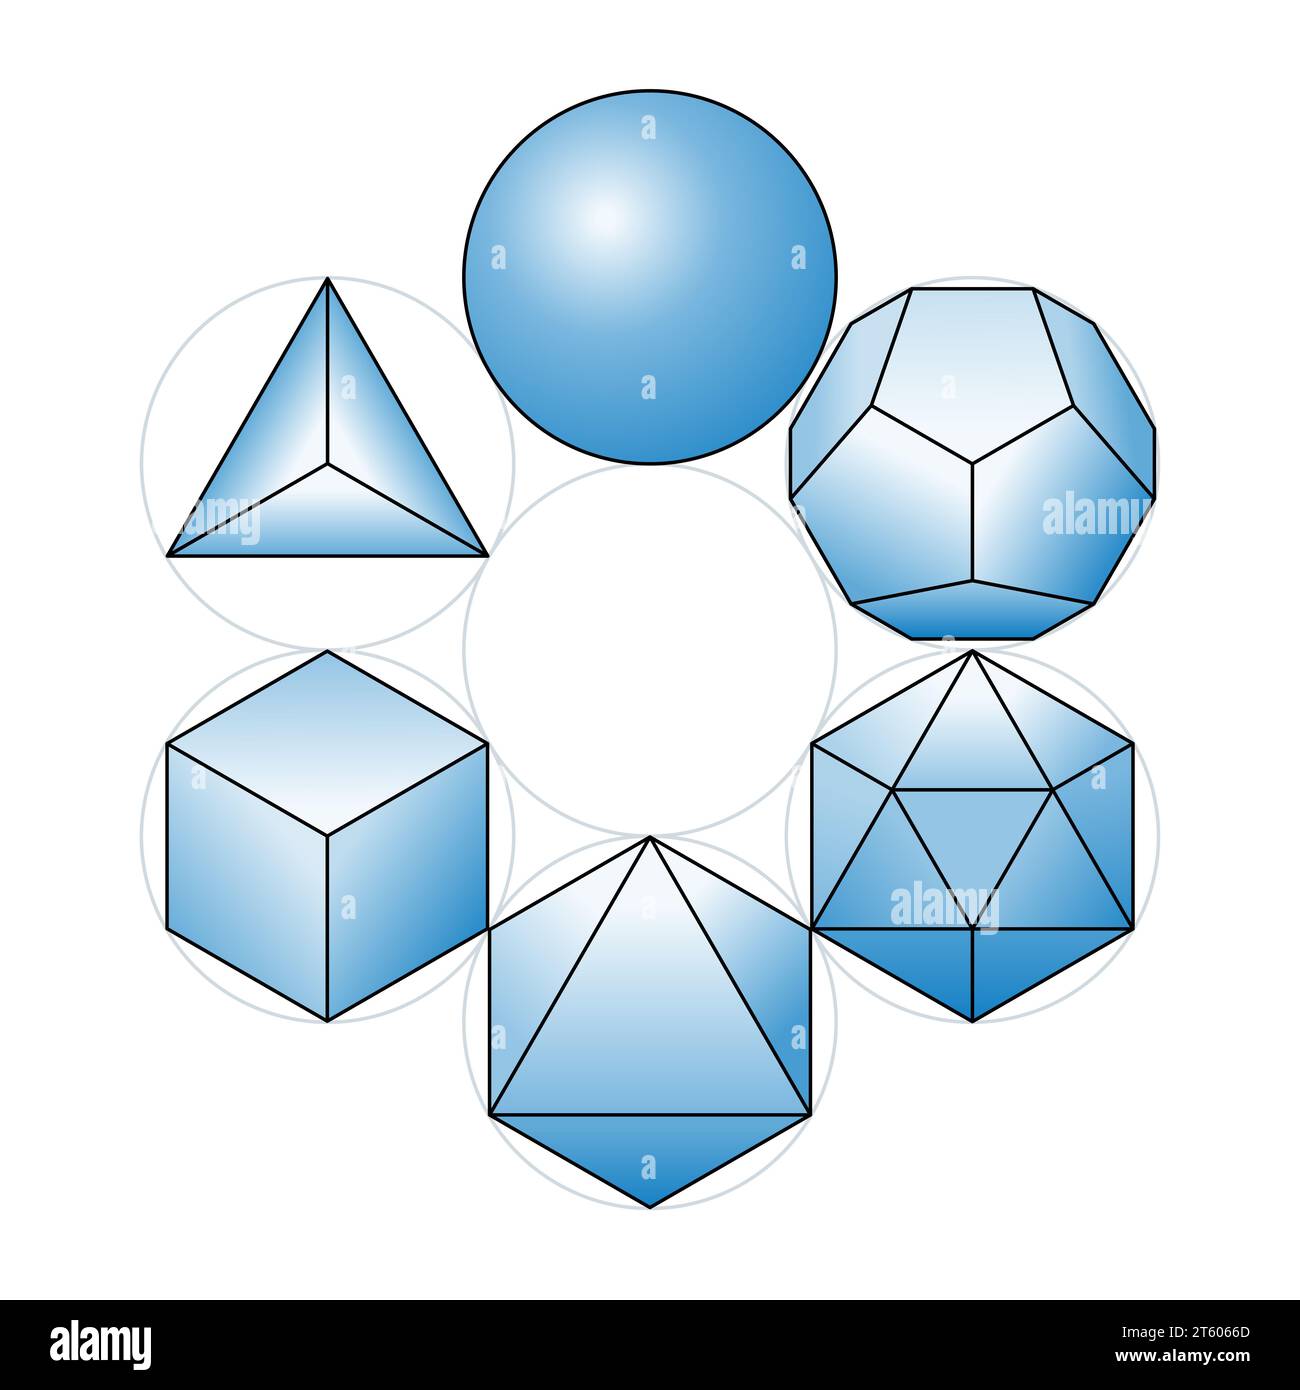 Sphere with the Platonic solids placed in circles, all arranged around a seventh circle. Four elements, ether and void. Stock Photo